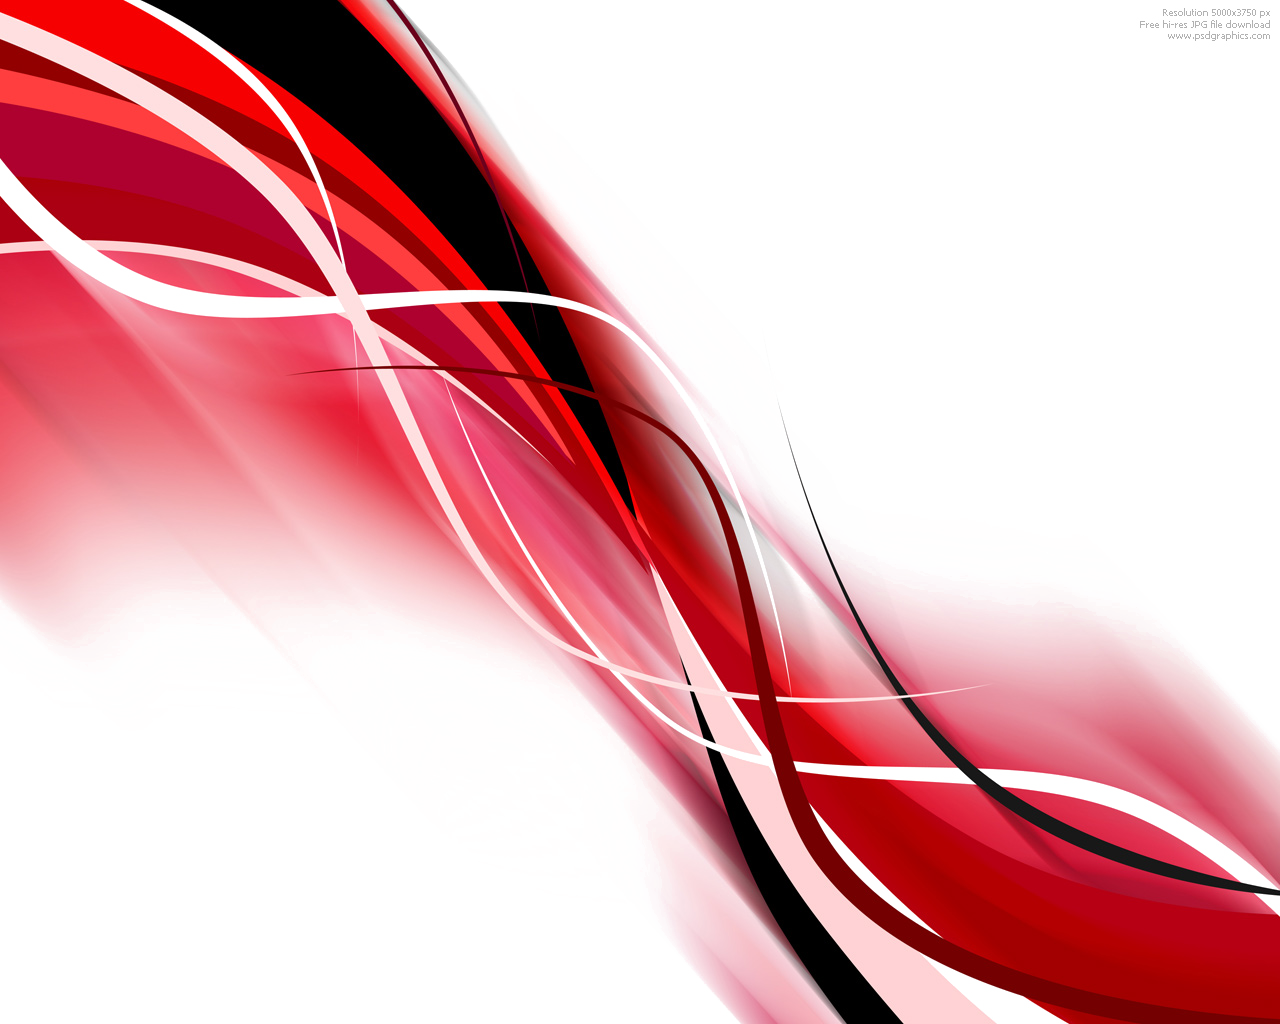 Red Abstract Lines PNG Transparent Image